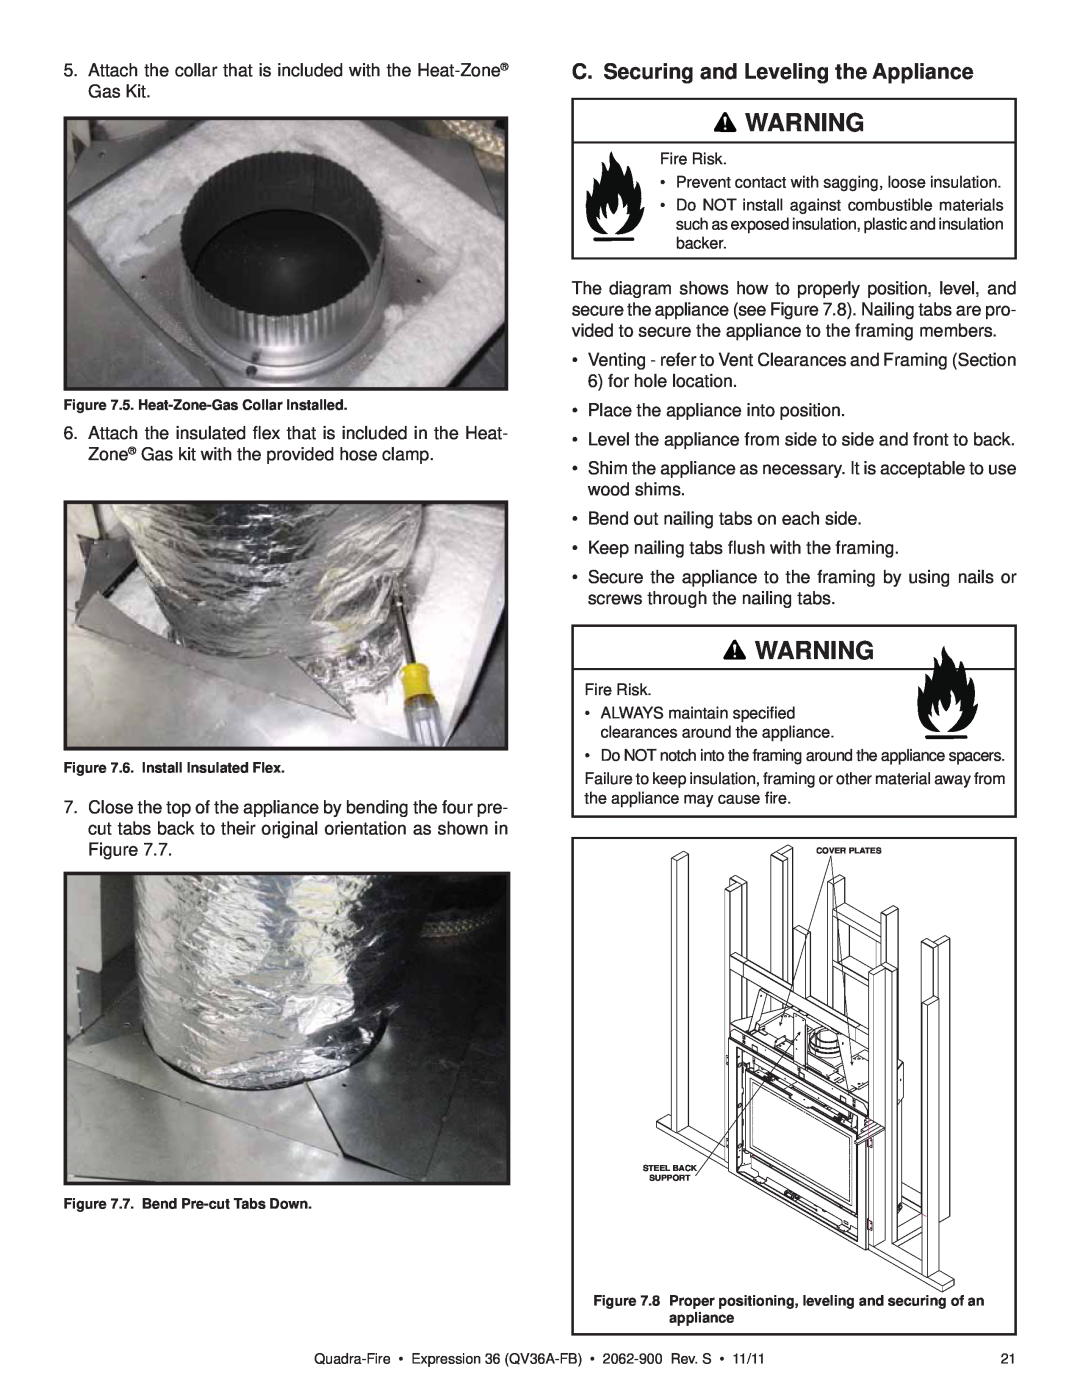 Quadra-Fire QV36A-FB owner manual C. Securing and Leveling the Appliance 